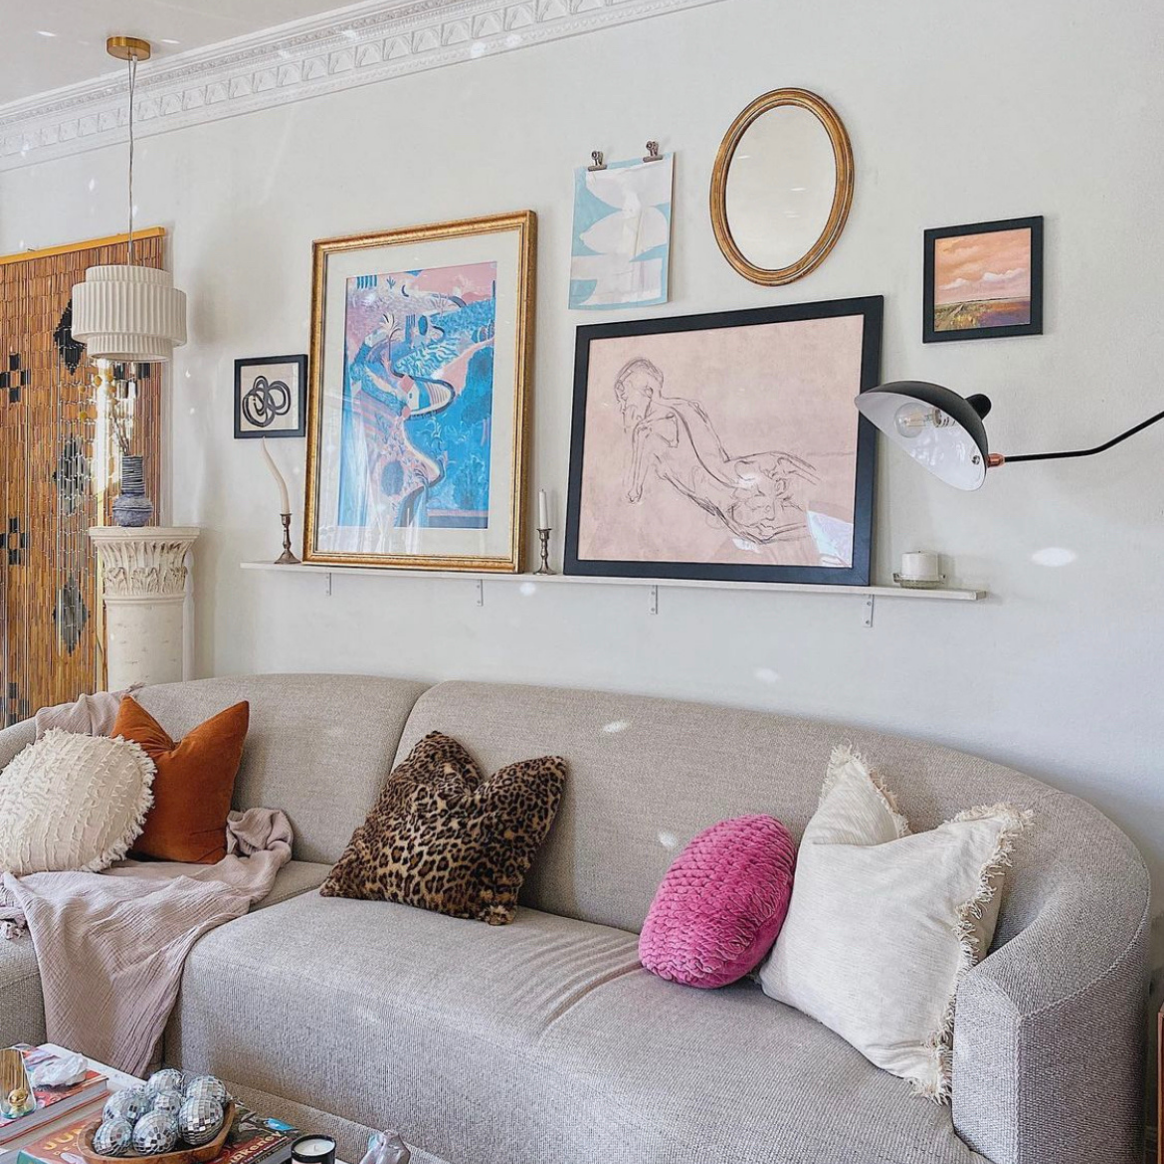 Gallery Wall Tips From the Pros